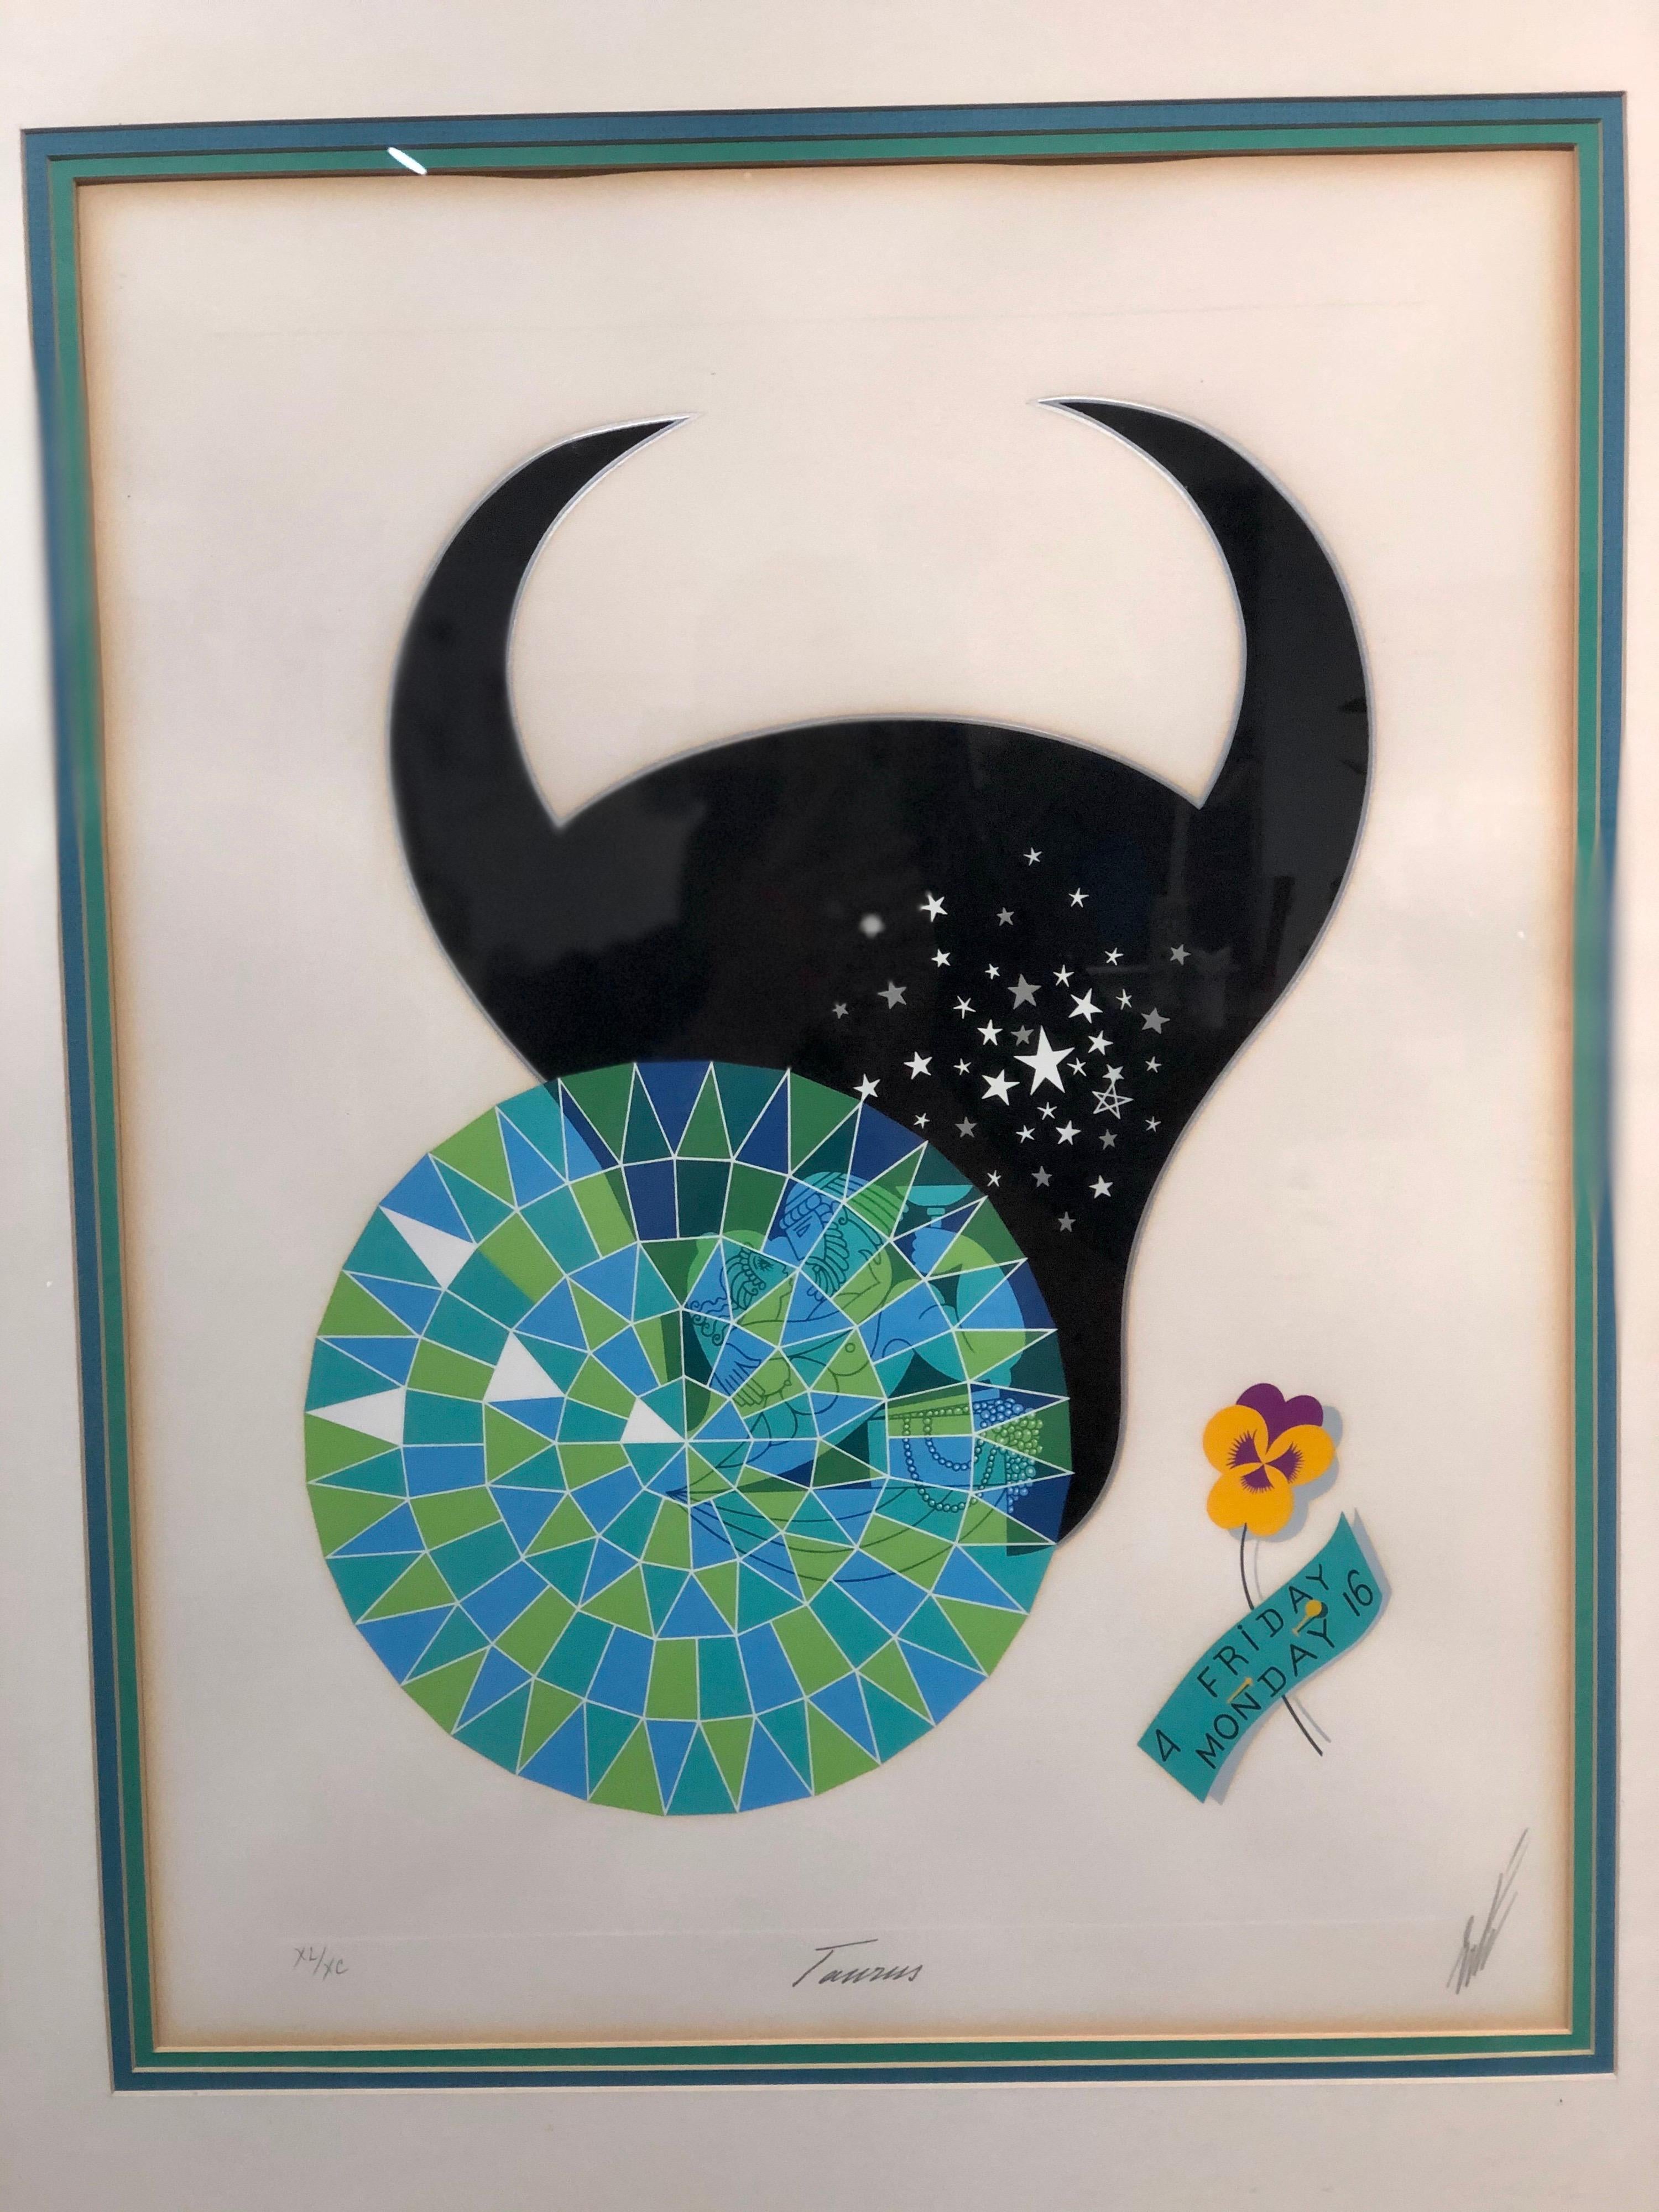 Original framed zodiac series Erte serigraph signed and numbered dated 1982, edition 475, numbered 350/90 nice original frame in white wood lacquer.